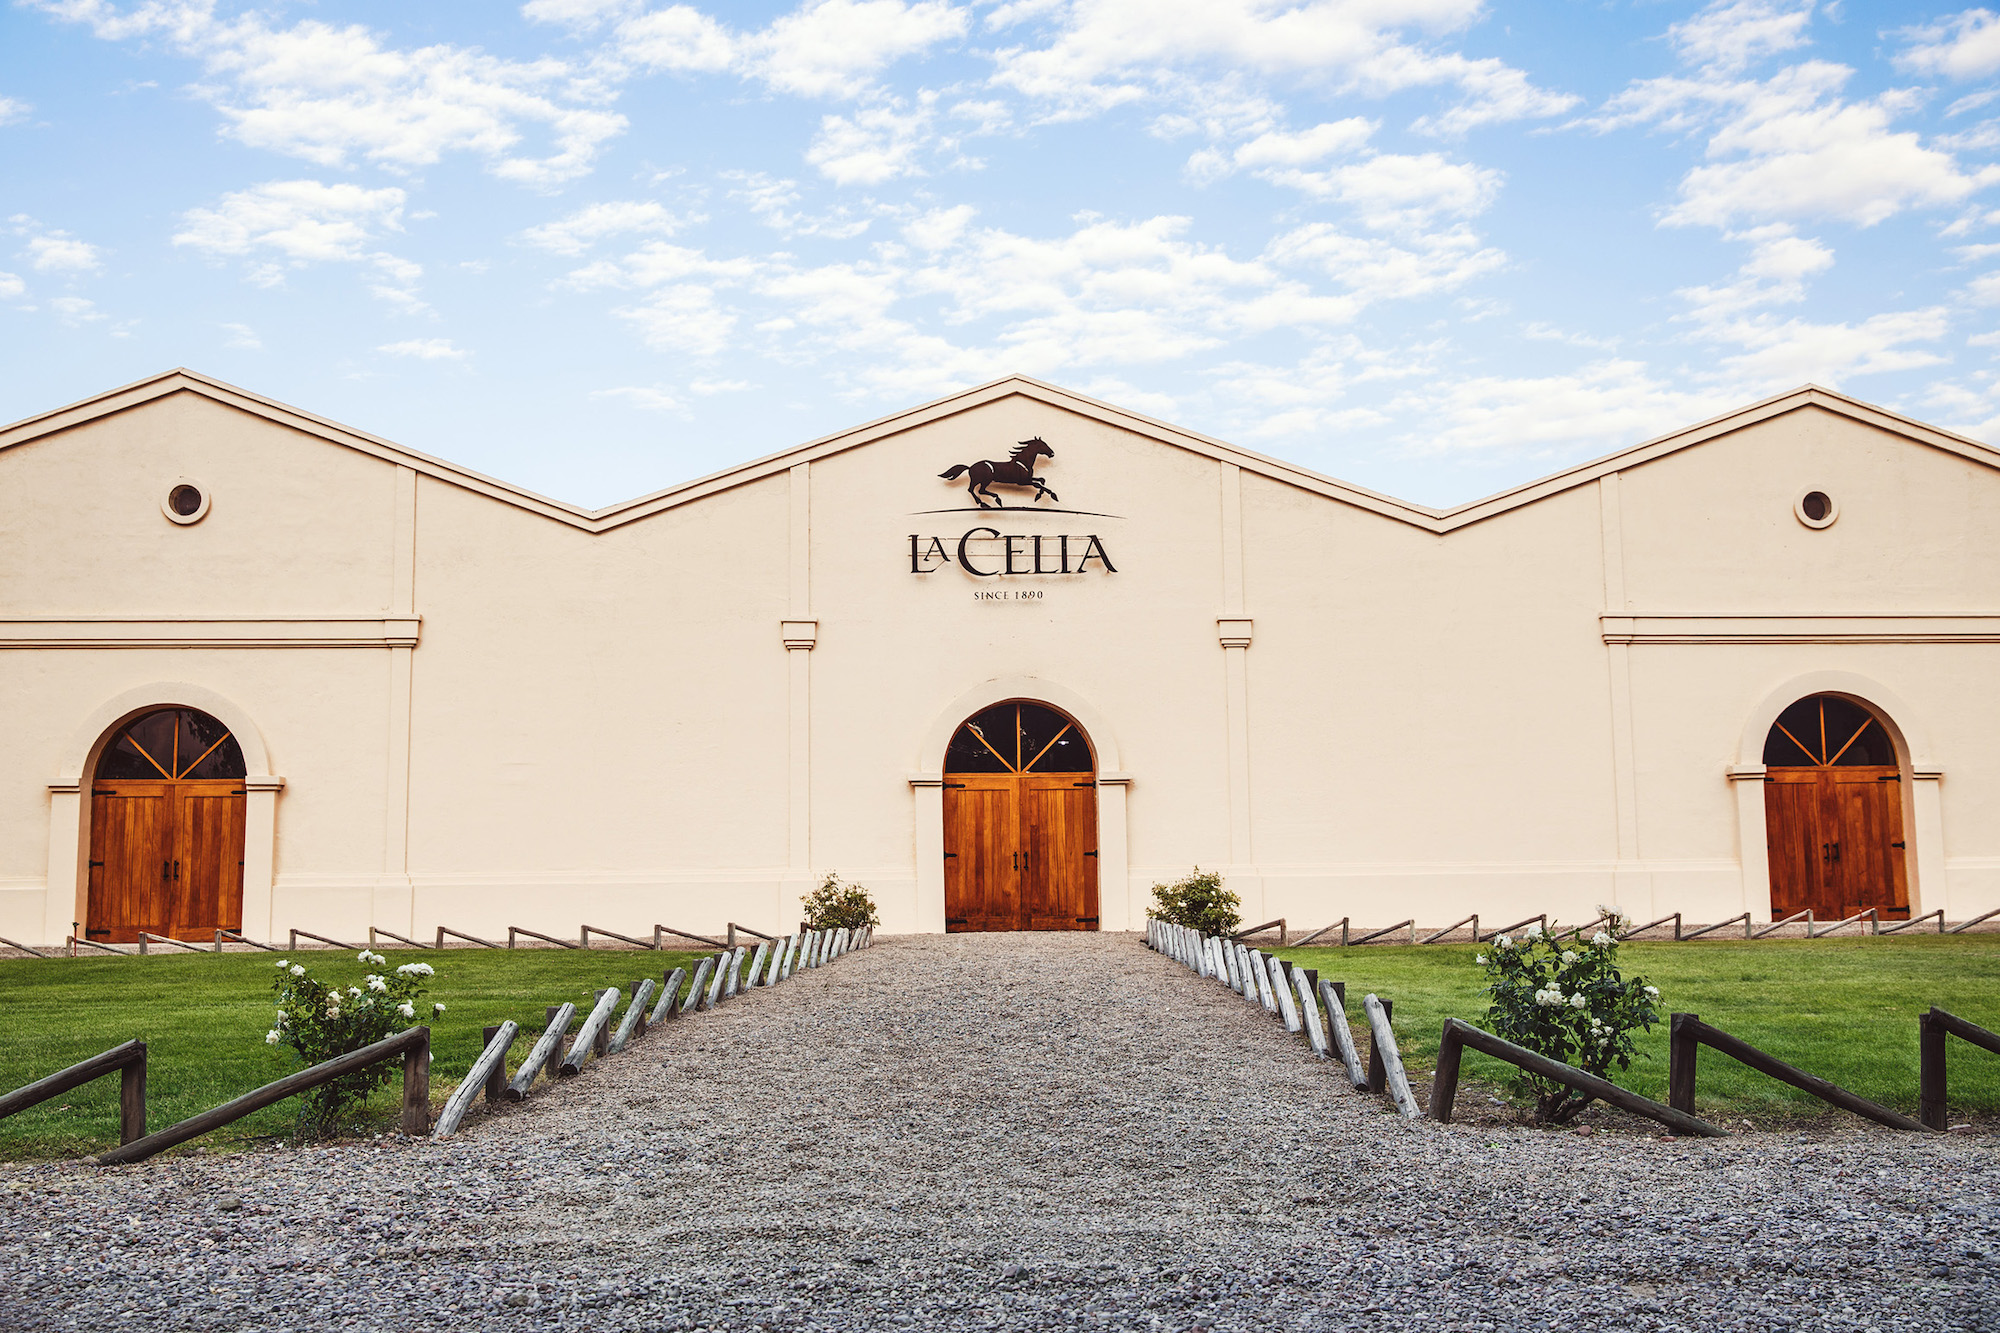 Finca La Celia winery and guide to the wineries of Uco Valley and Argentina